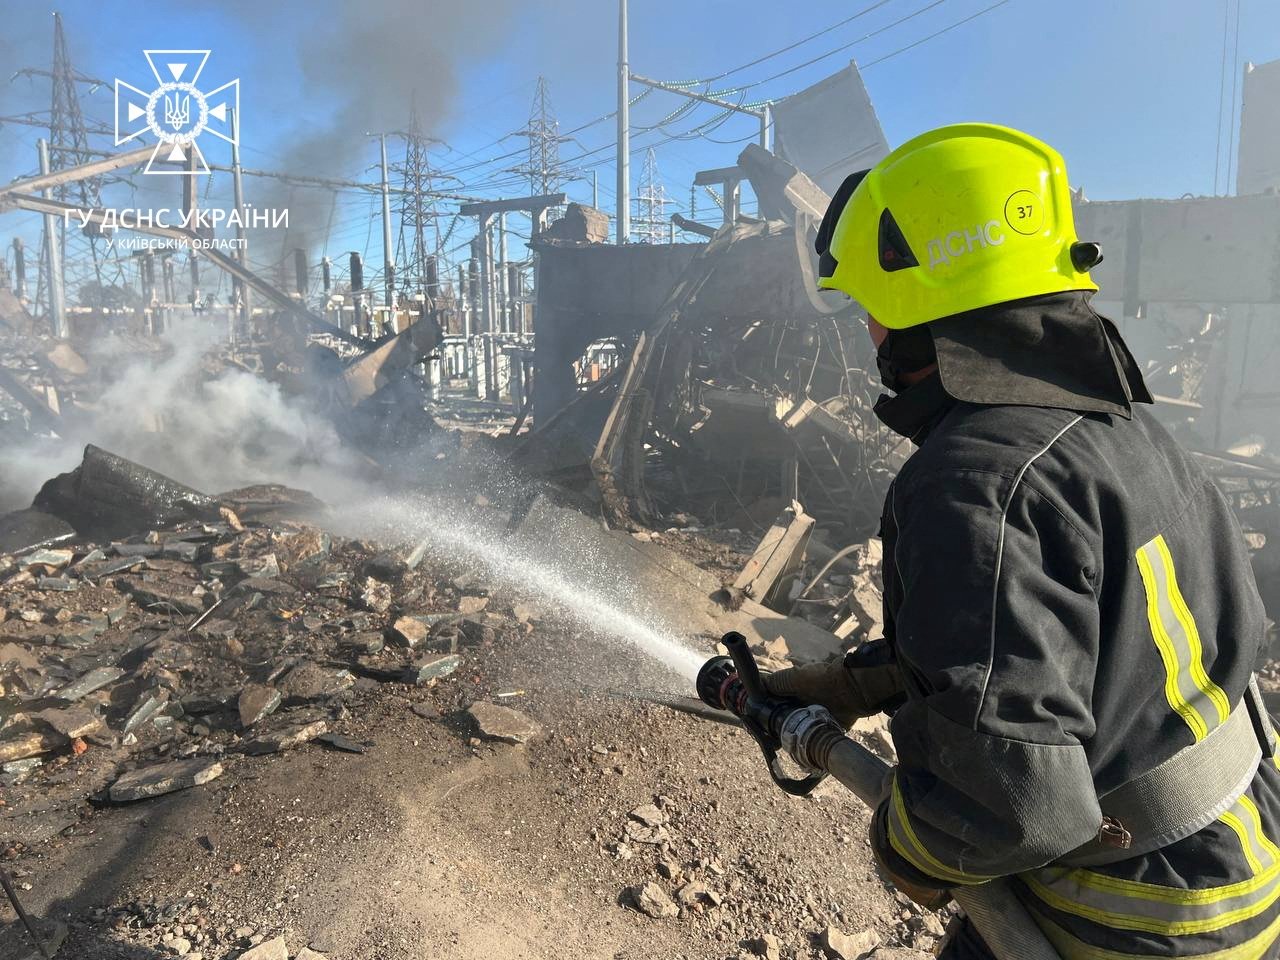 Firefighters work to put out a fire at energy infrastructure facilities, damaged by Russian drone strike, as Russia&#039;s attack on Ukraine continues, in Kyiv region, Ukraine Oct. 31, 2022.  (State Emergency Service of Ukraine/Handout via Reuters) 